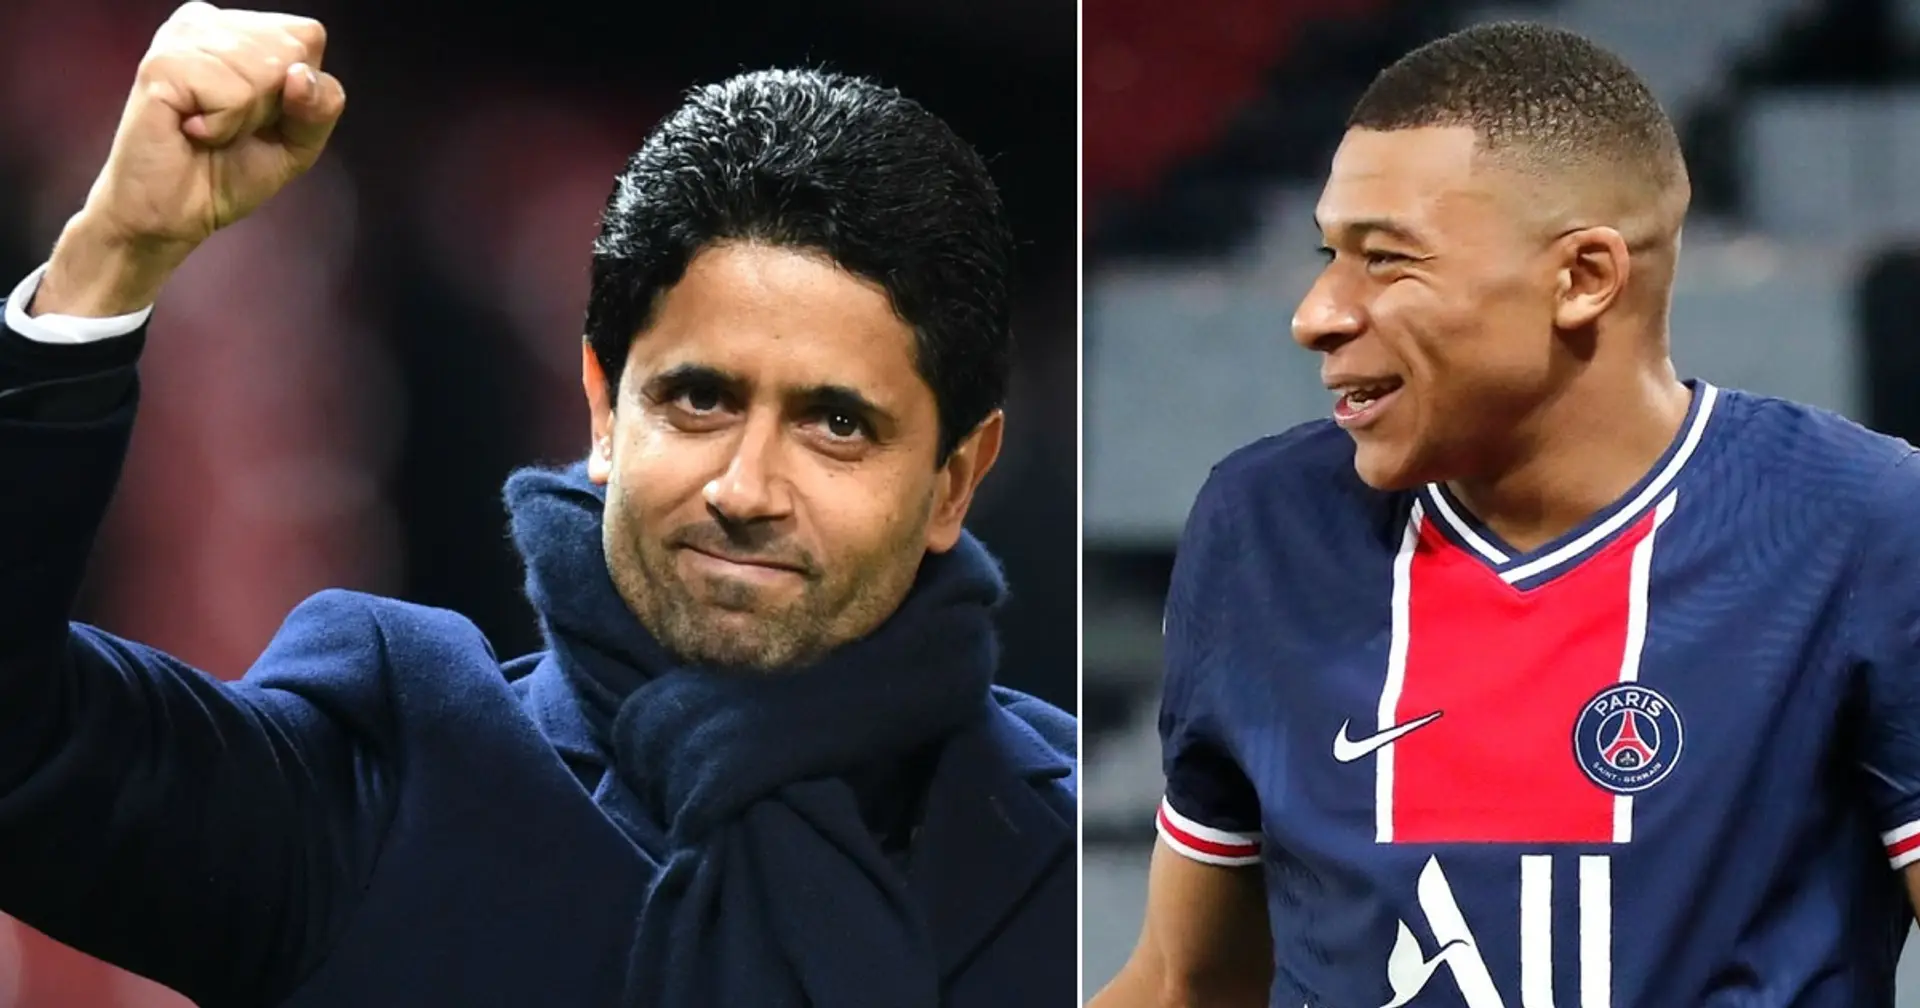 '0% that is happening': Barca fan explains why Mbappe won't want to join Real Madrid